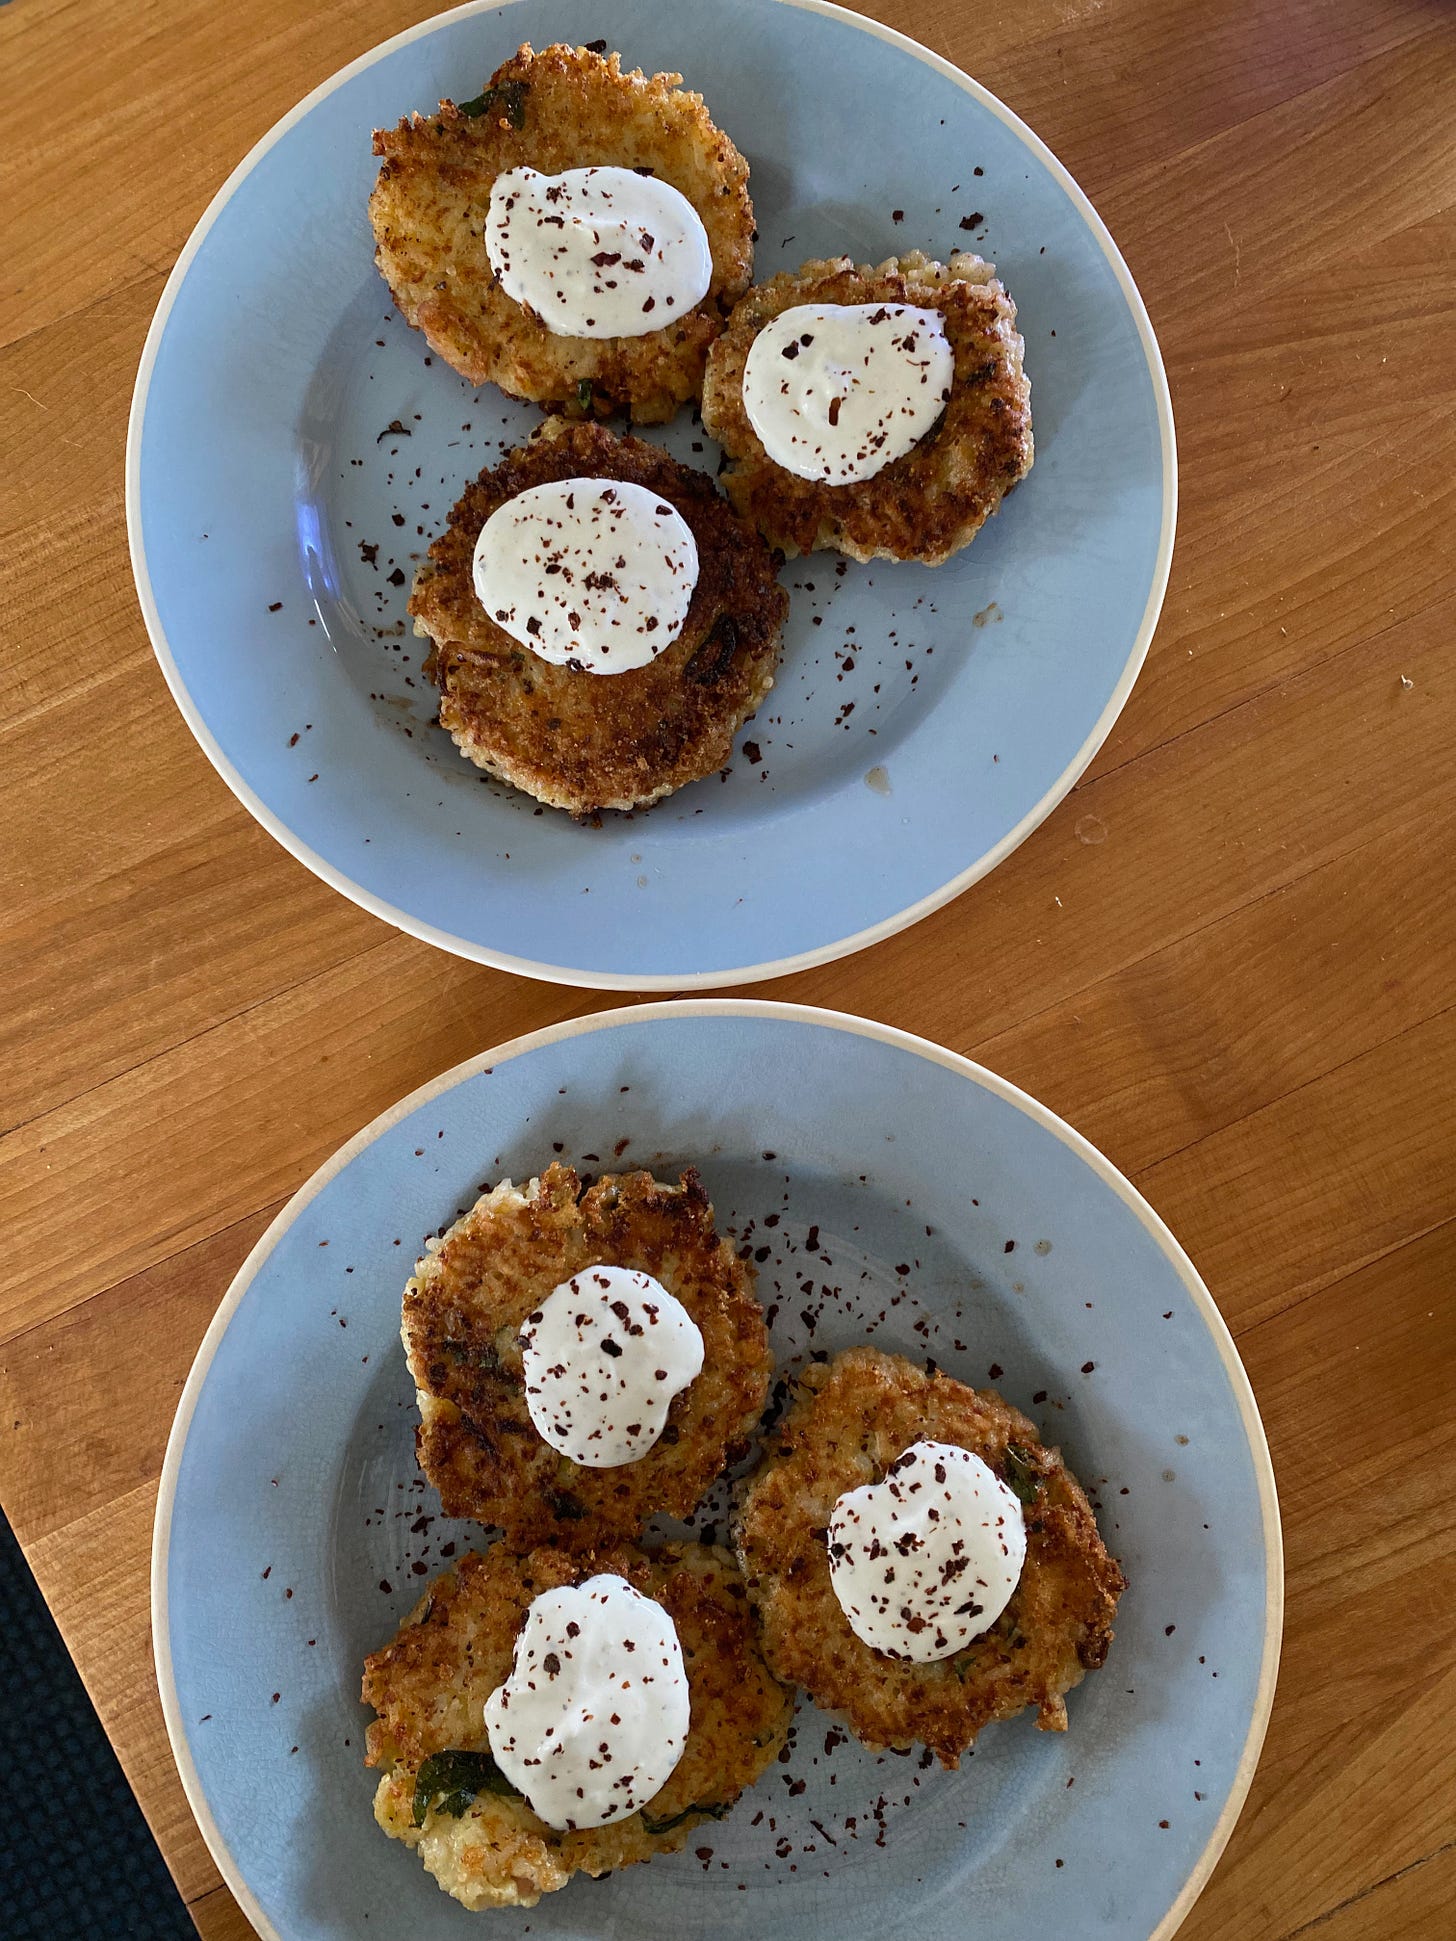 Two blue ceramic plates on a wooden counter, each holding three golden brown rice fritted topped with yogurt sauce and red pepper flakes.